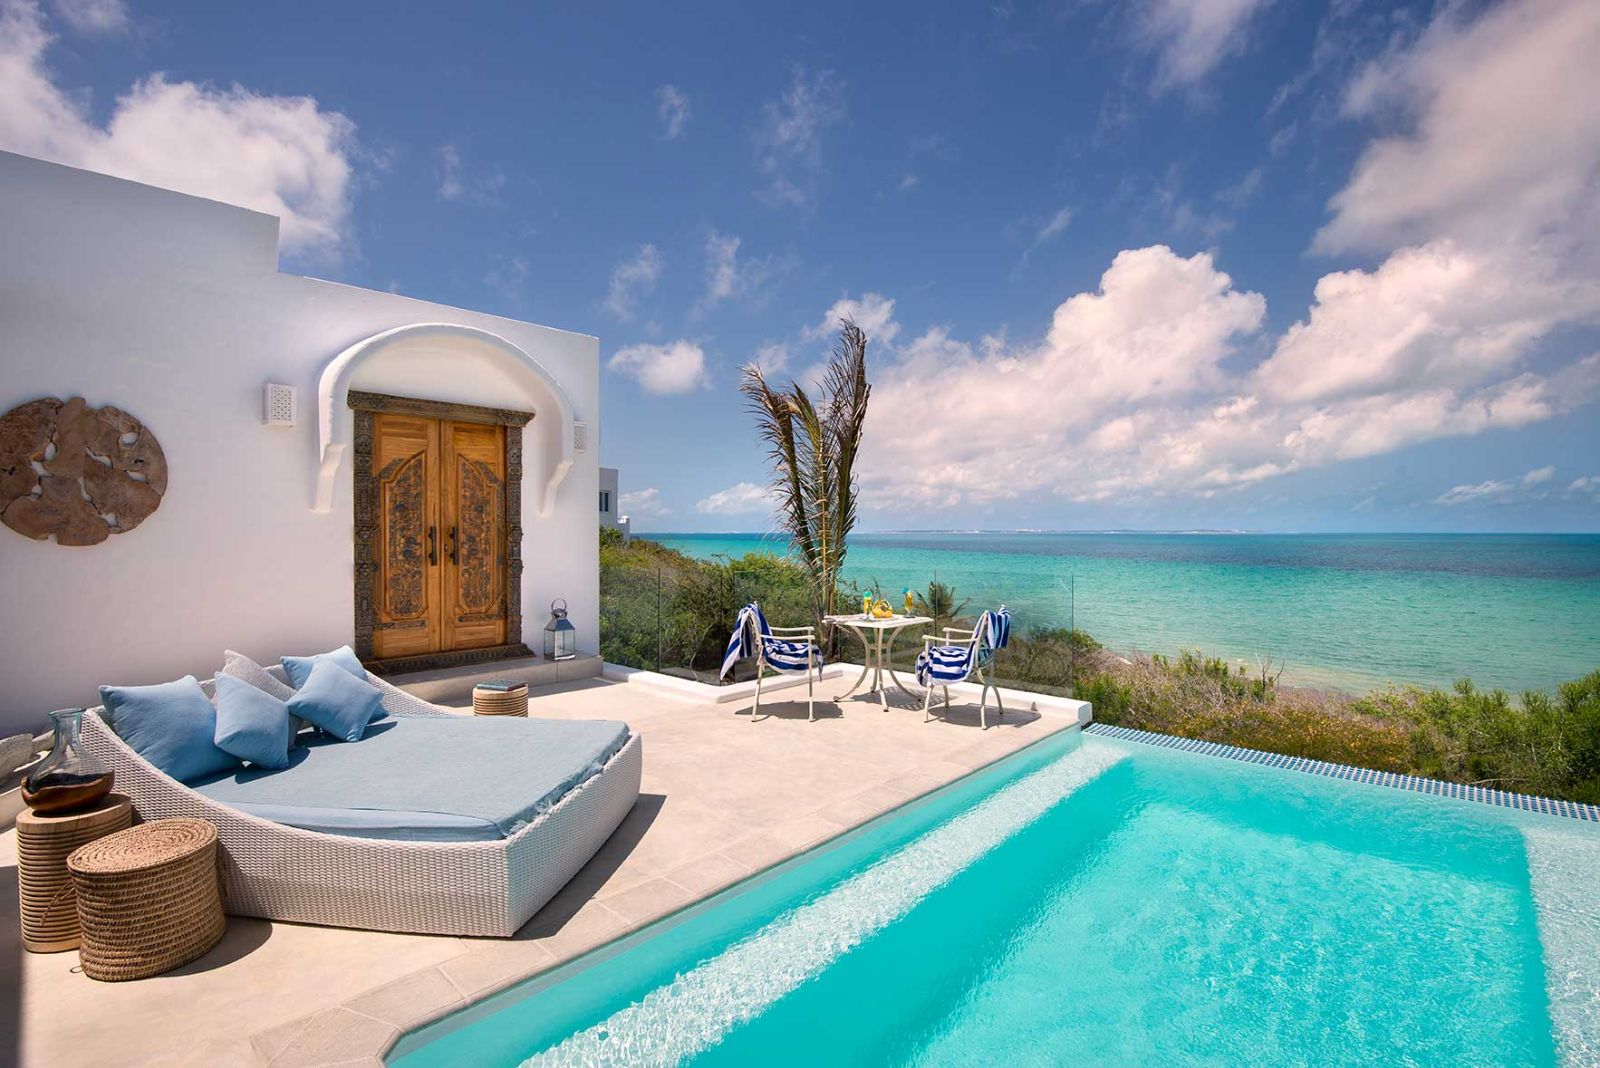 Plunge pool and terrace area at Santorin resort on Mozambique's south coast